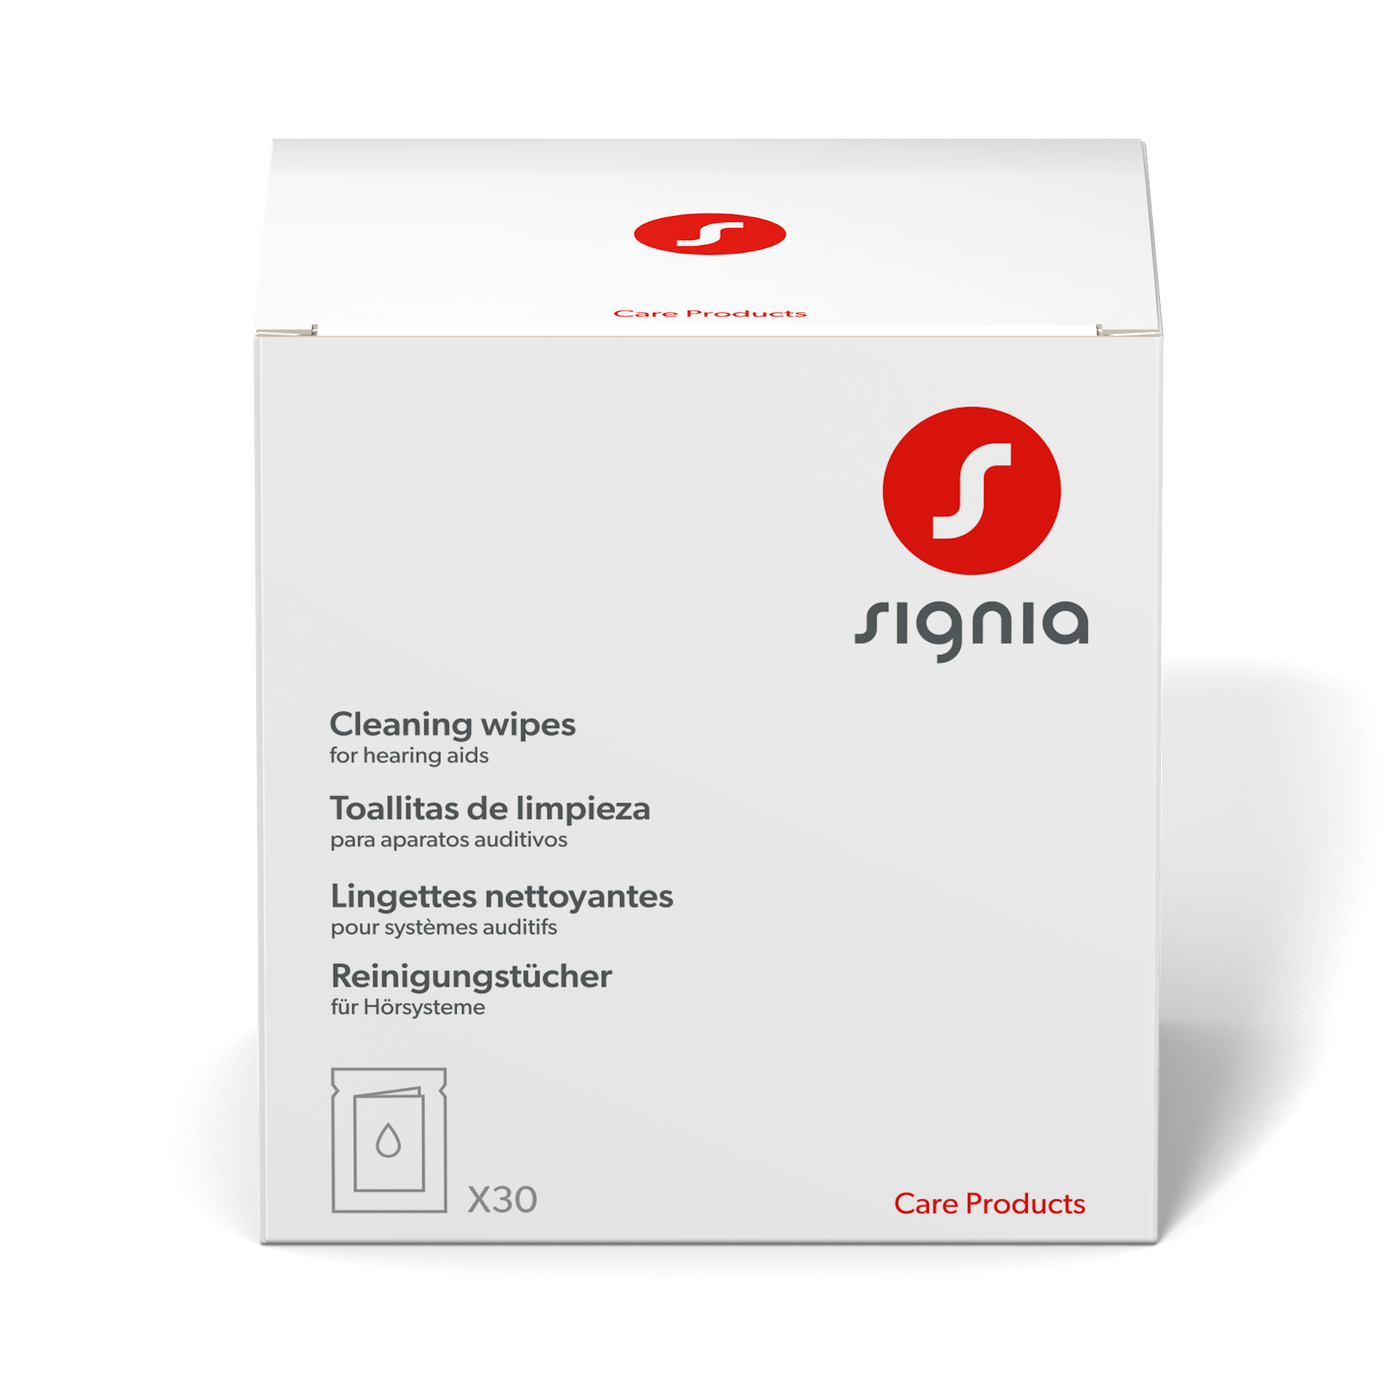    signia hearing aid accessories Cleaning Wipes SIGNIA 10943753